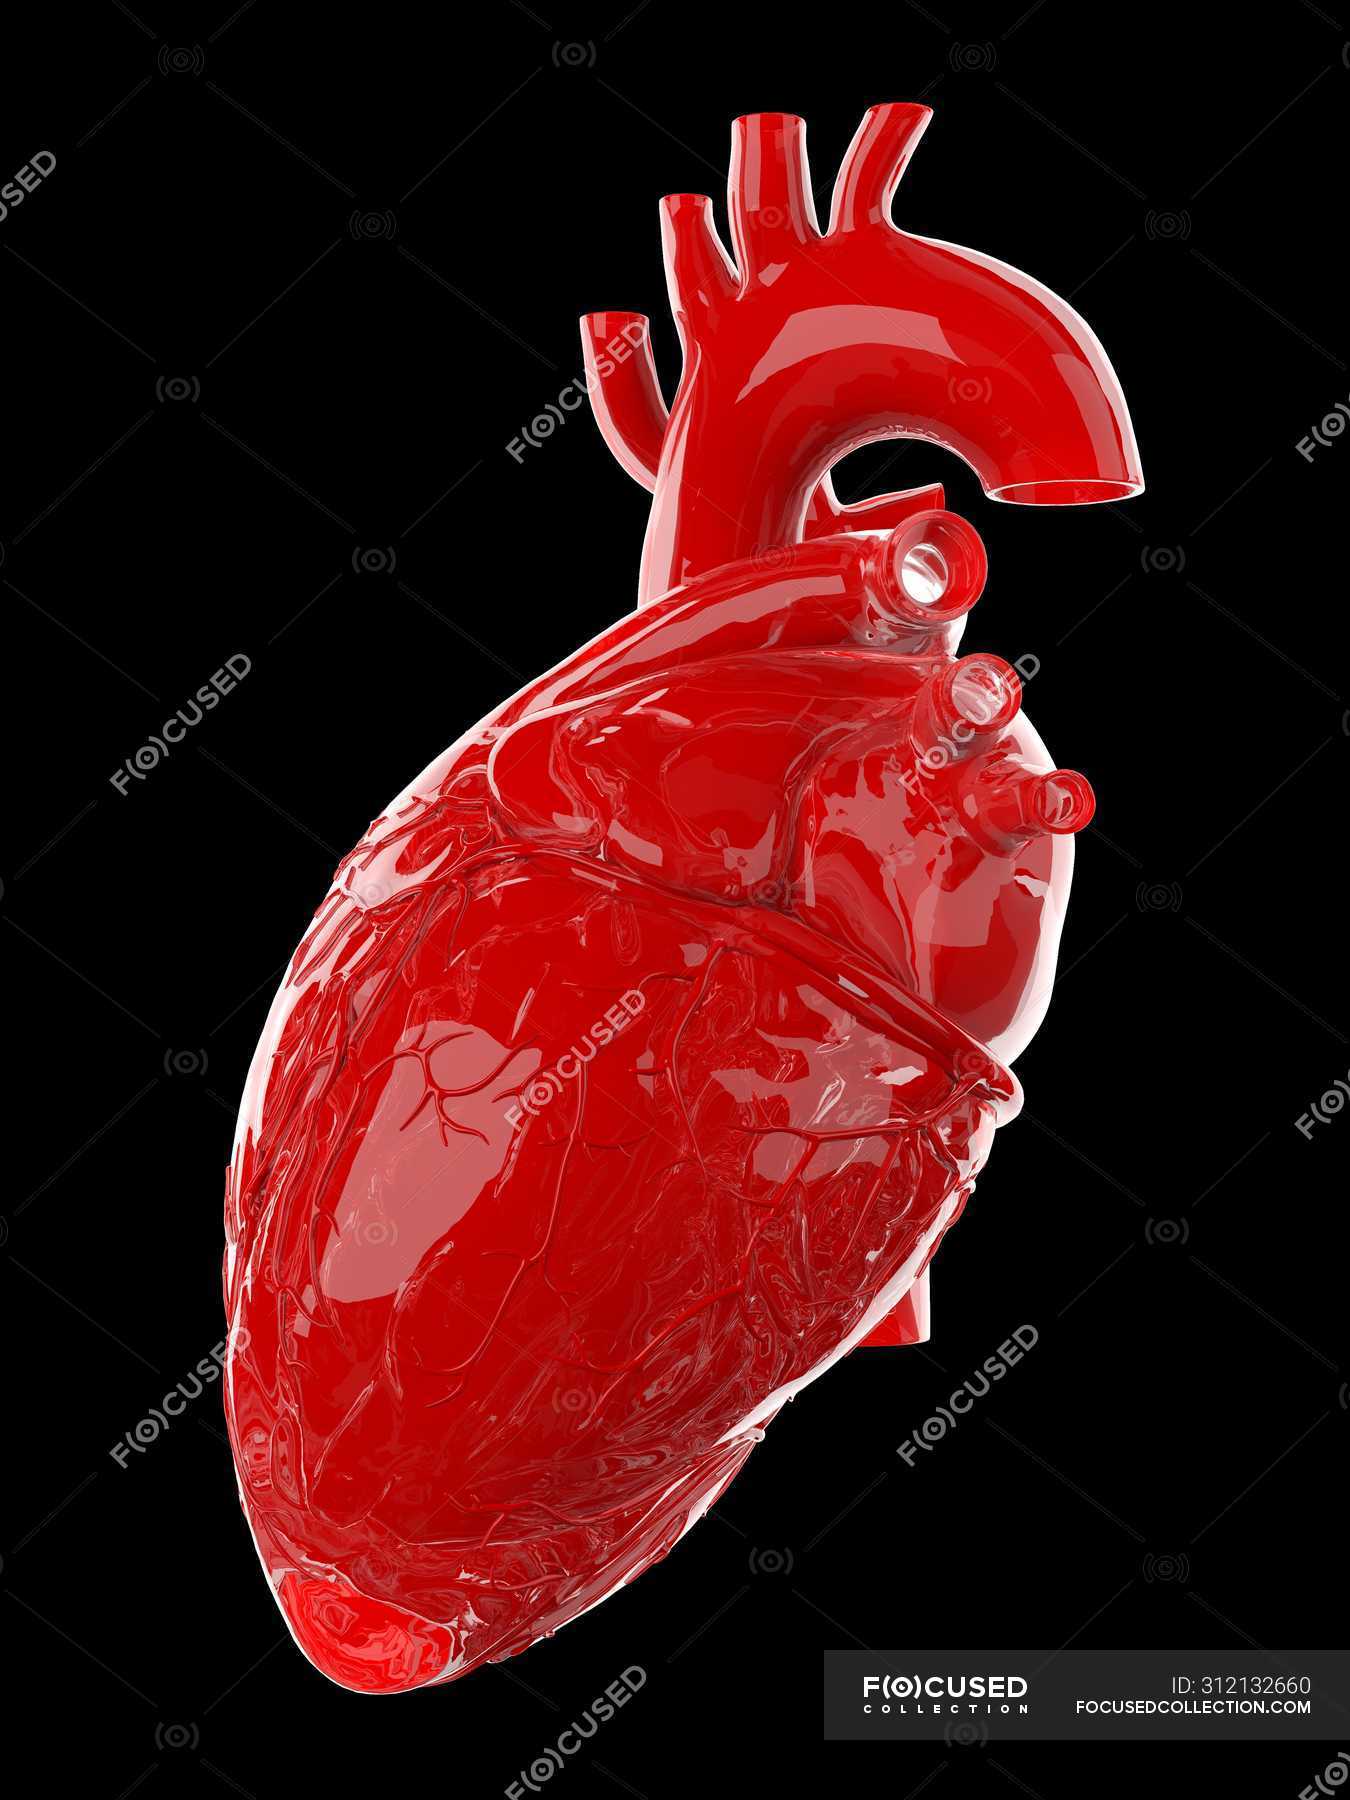 Red human heart on black background, computer illustration. — normal,  artwork - Stock Photo | #312132660